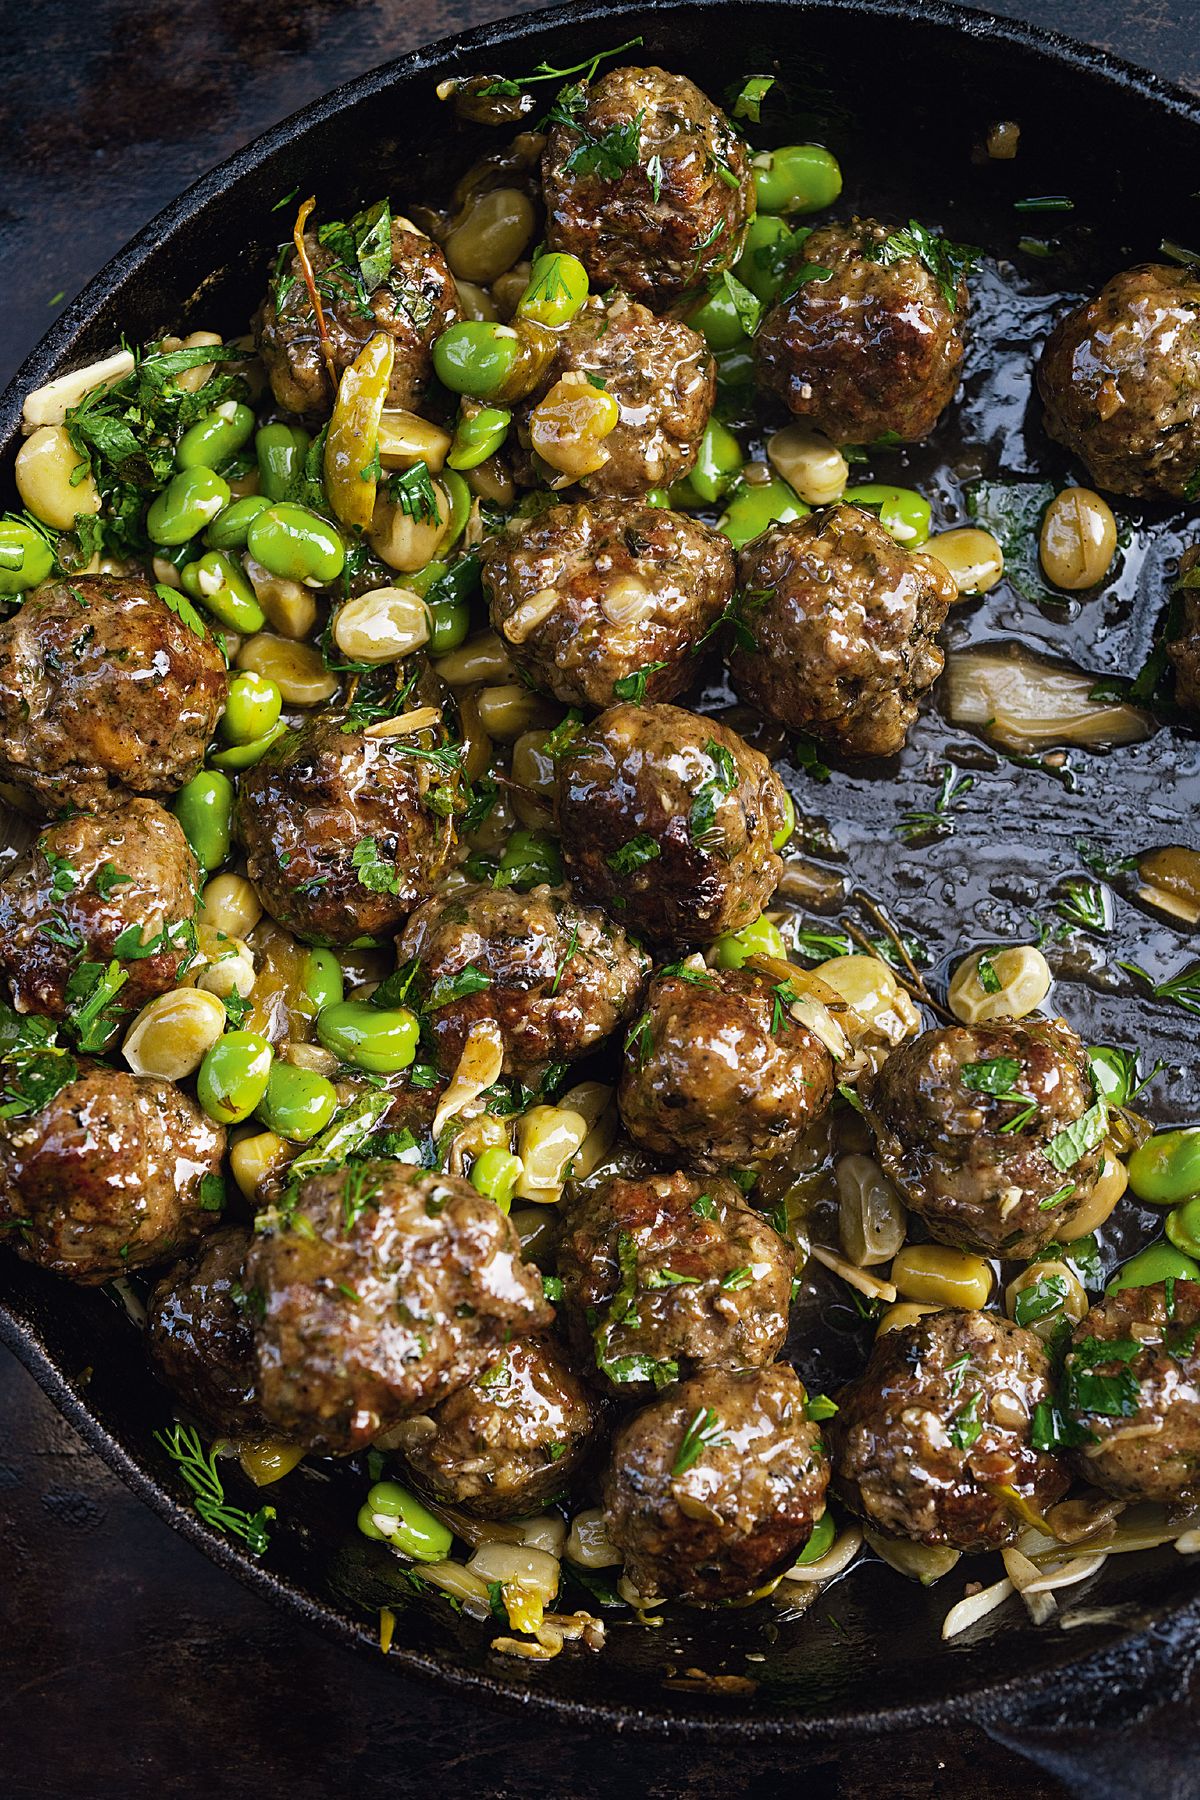 Ottolenghi’s Beef Meatballs with Broad Beans and Lemon